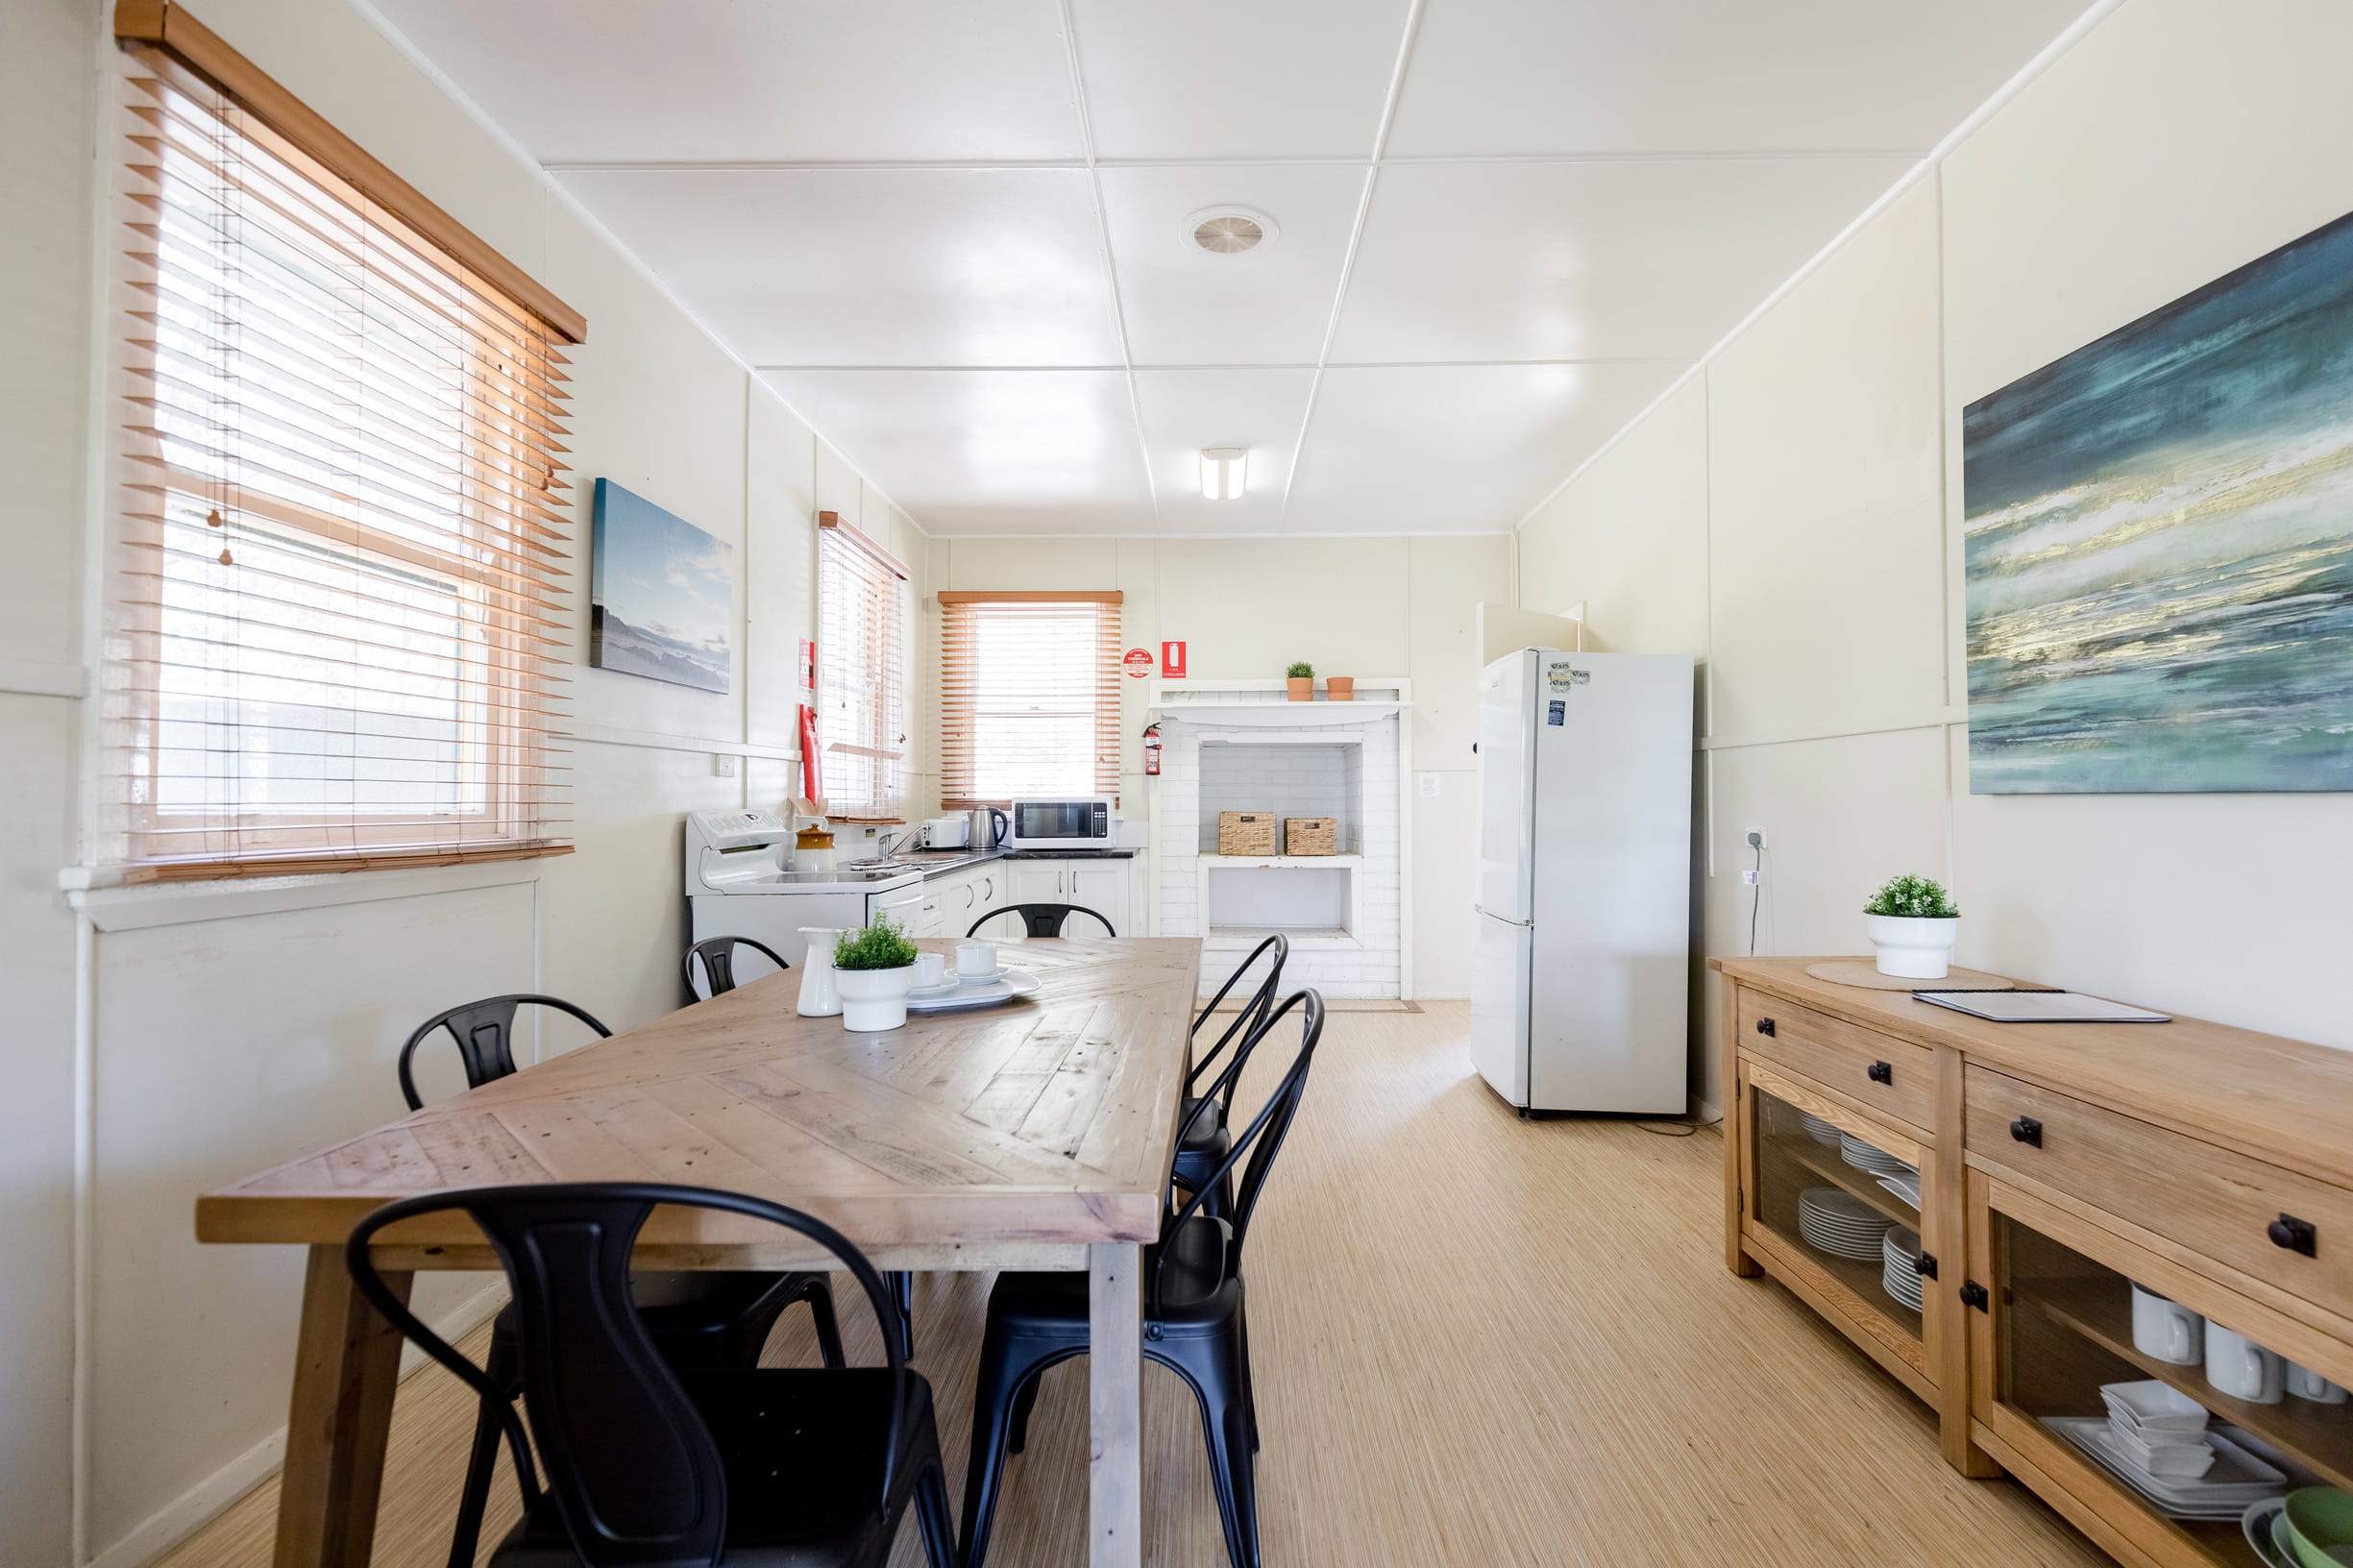 The kitchen and dining room at Tuckers Rocks Cottage in Bongil Bongil National Park. Photo: Mitchell Franzi/DPIE